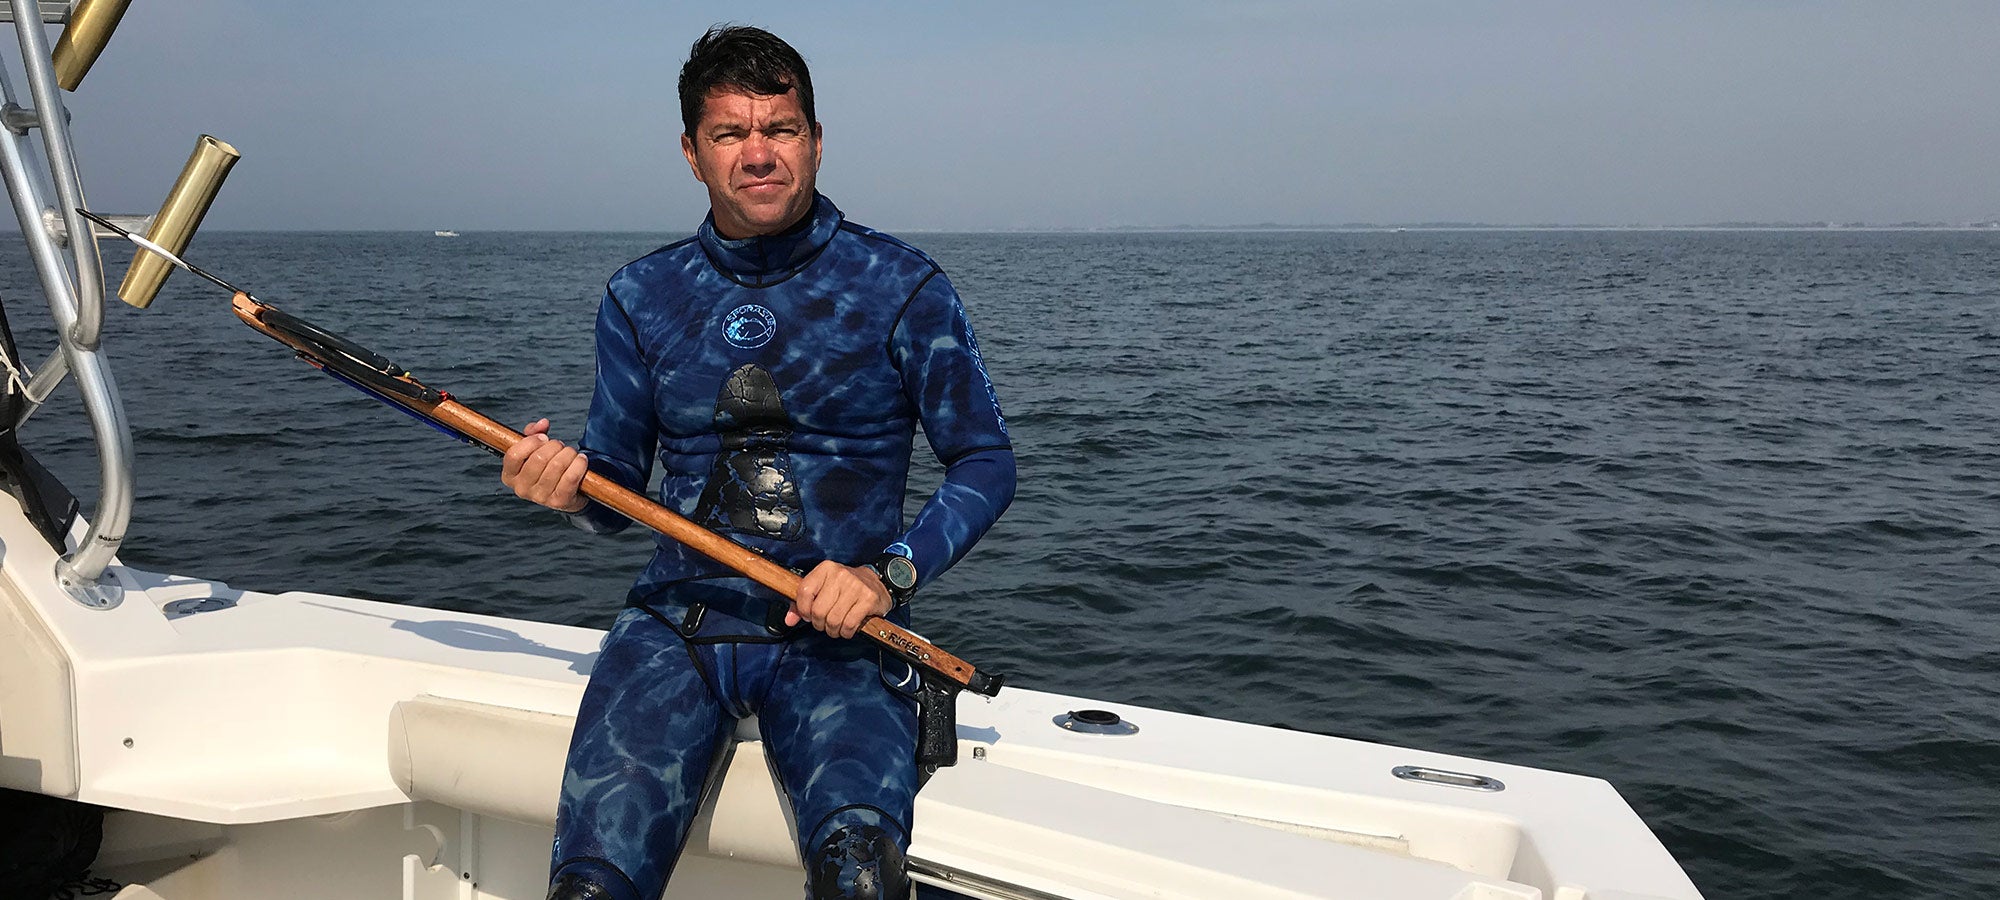 Make a Stab: Spearfishing for Striped Bass in New York Harbor